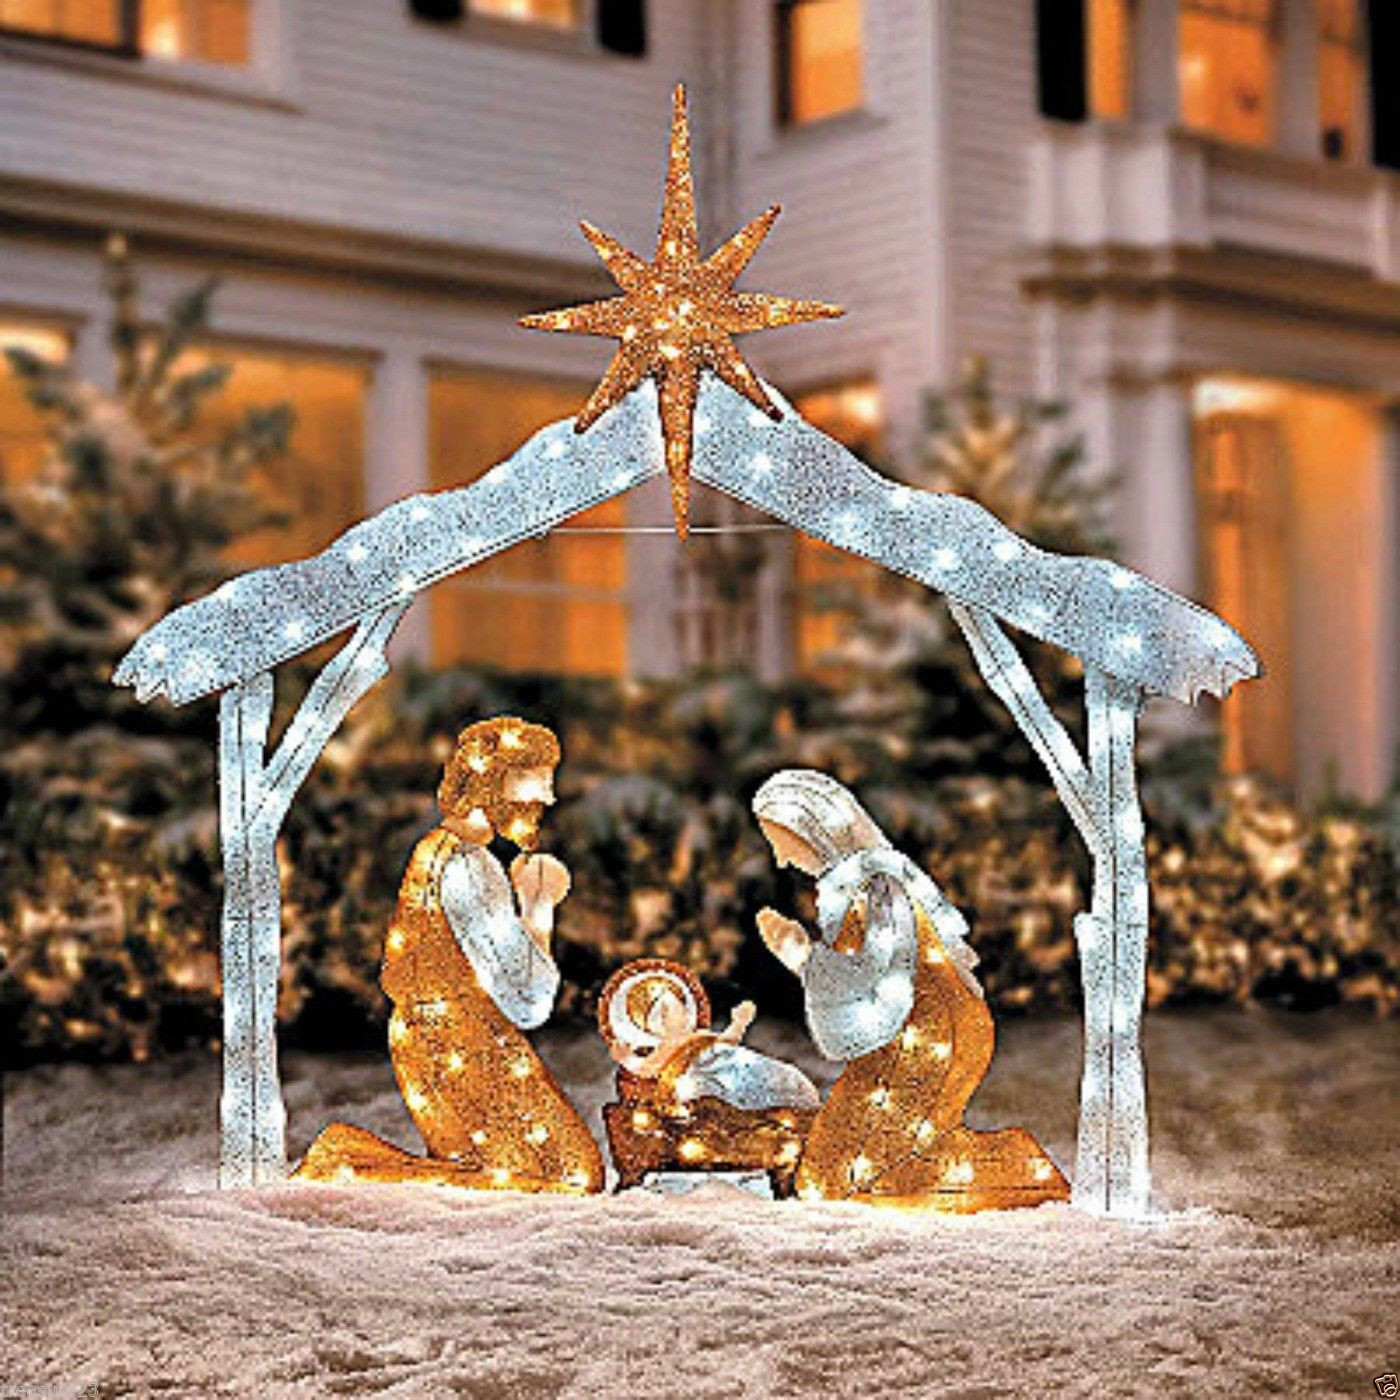 Christmas Nativity Scene Outdoor
 15 Christmas Nativity Sets Design Ideas for This Year